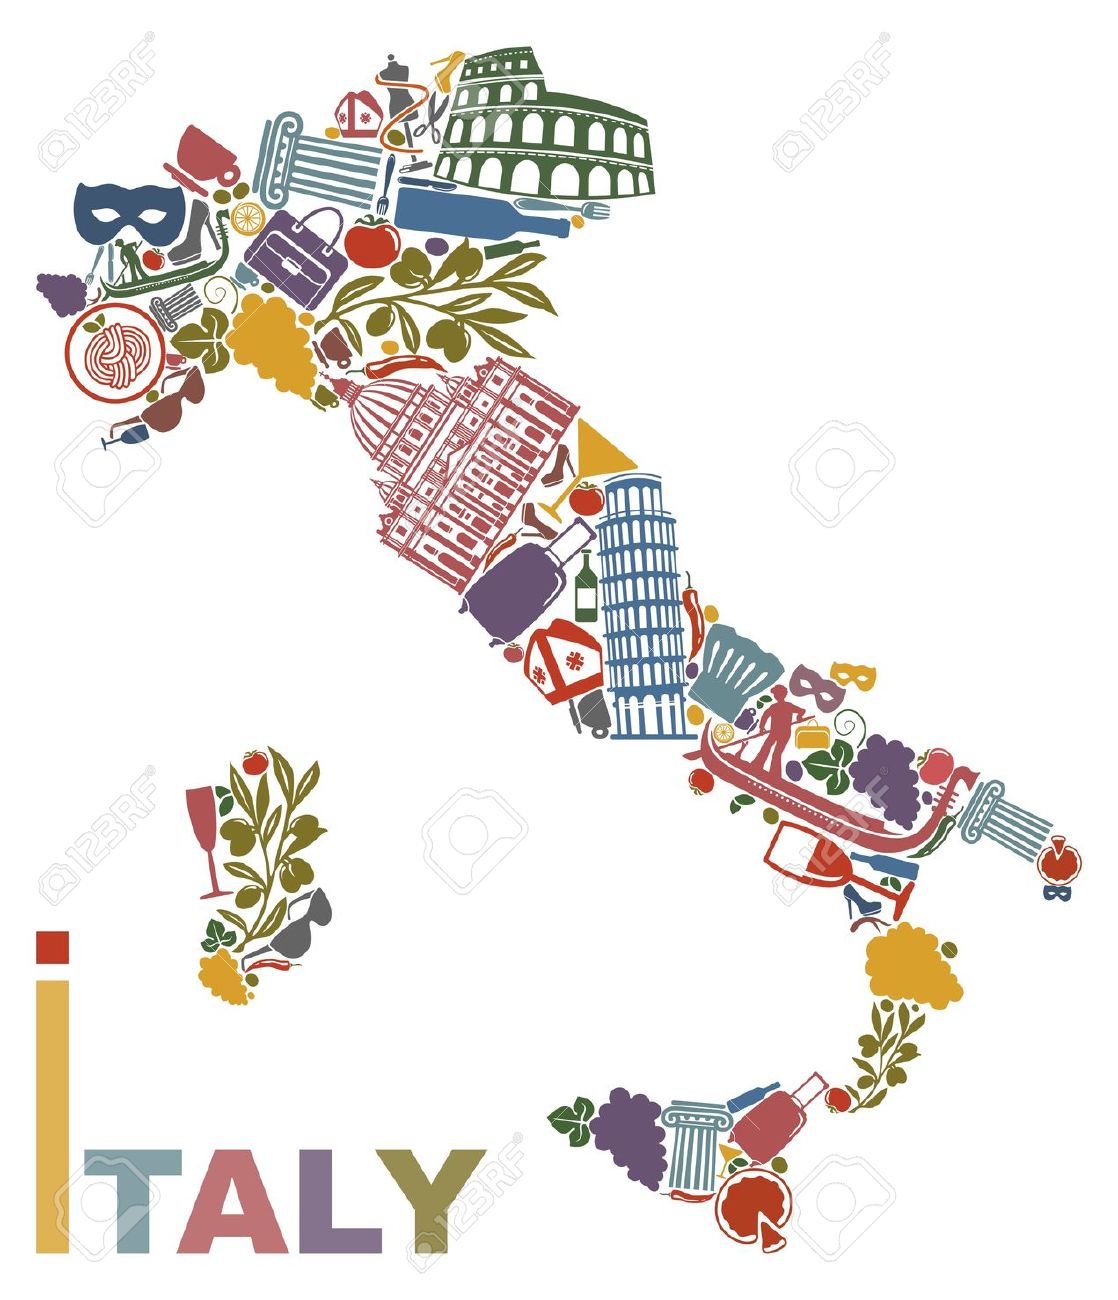 free clipart map of italy - photo #41